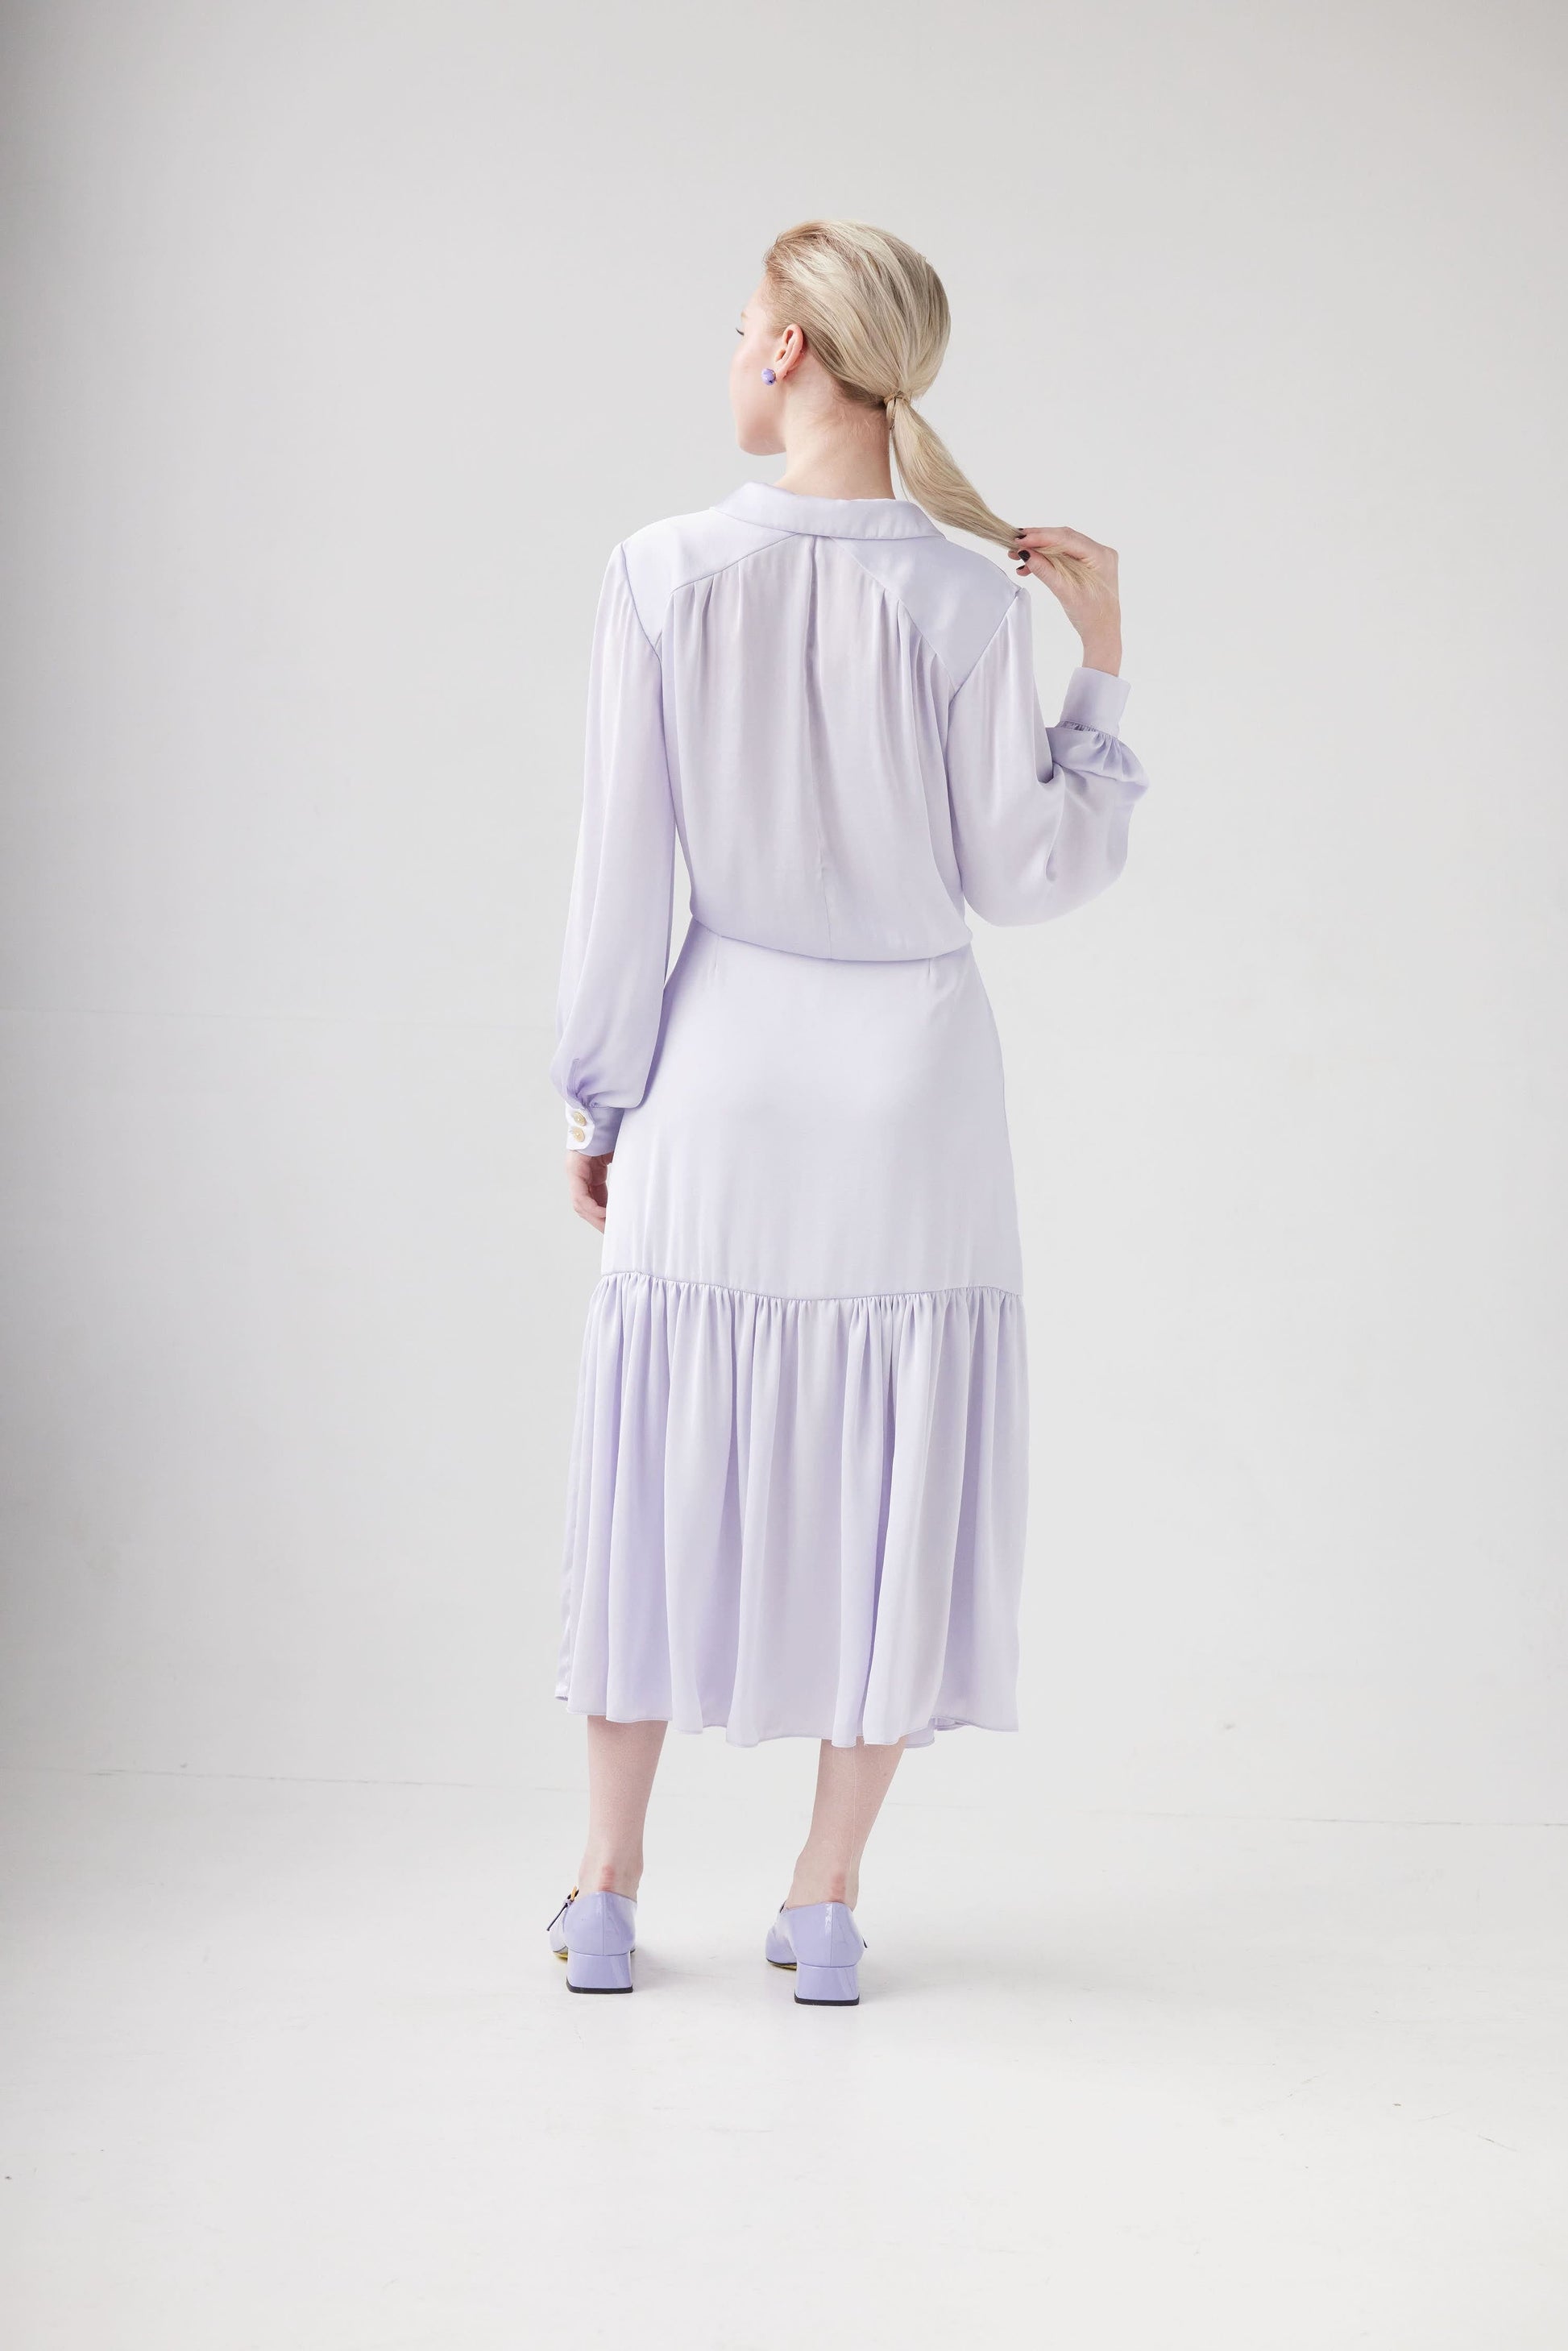 Colette Skirt in Japanese Charmeuse Skirts Christine Alcalay   